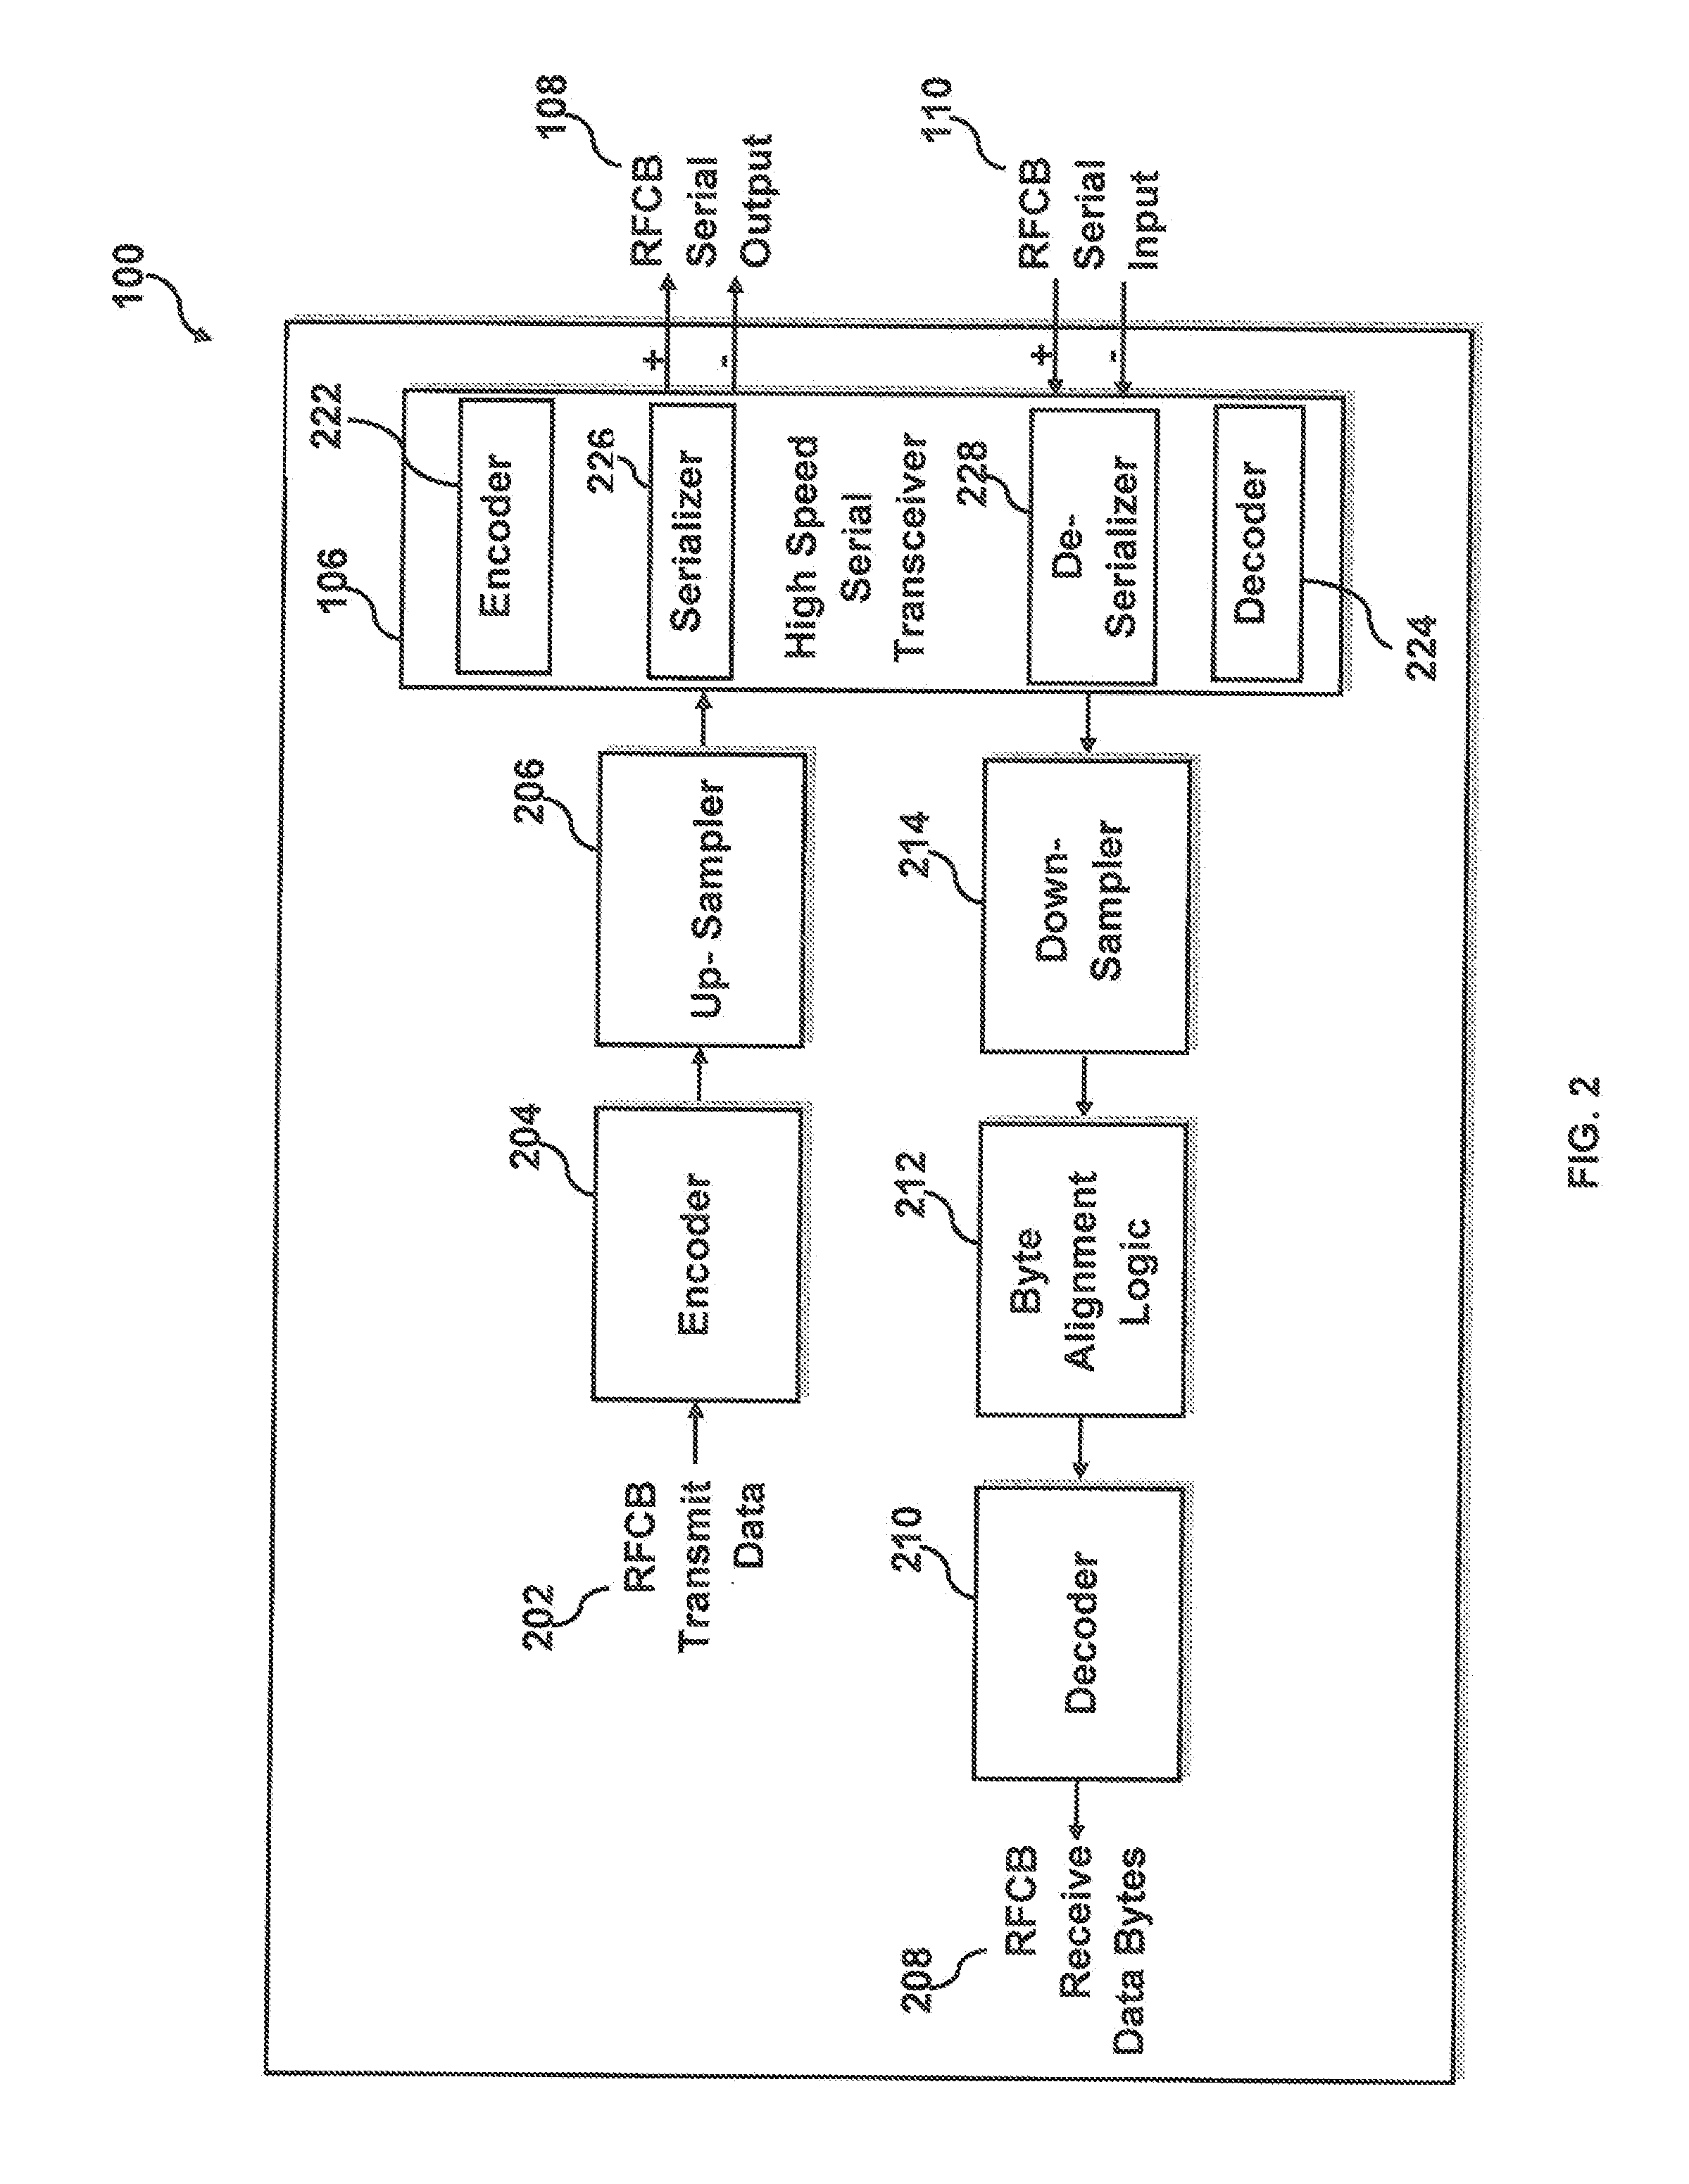 Method for emulating low frequency serial clock data recovery RF control bus operation using high frequency data